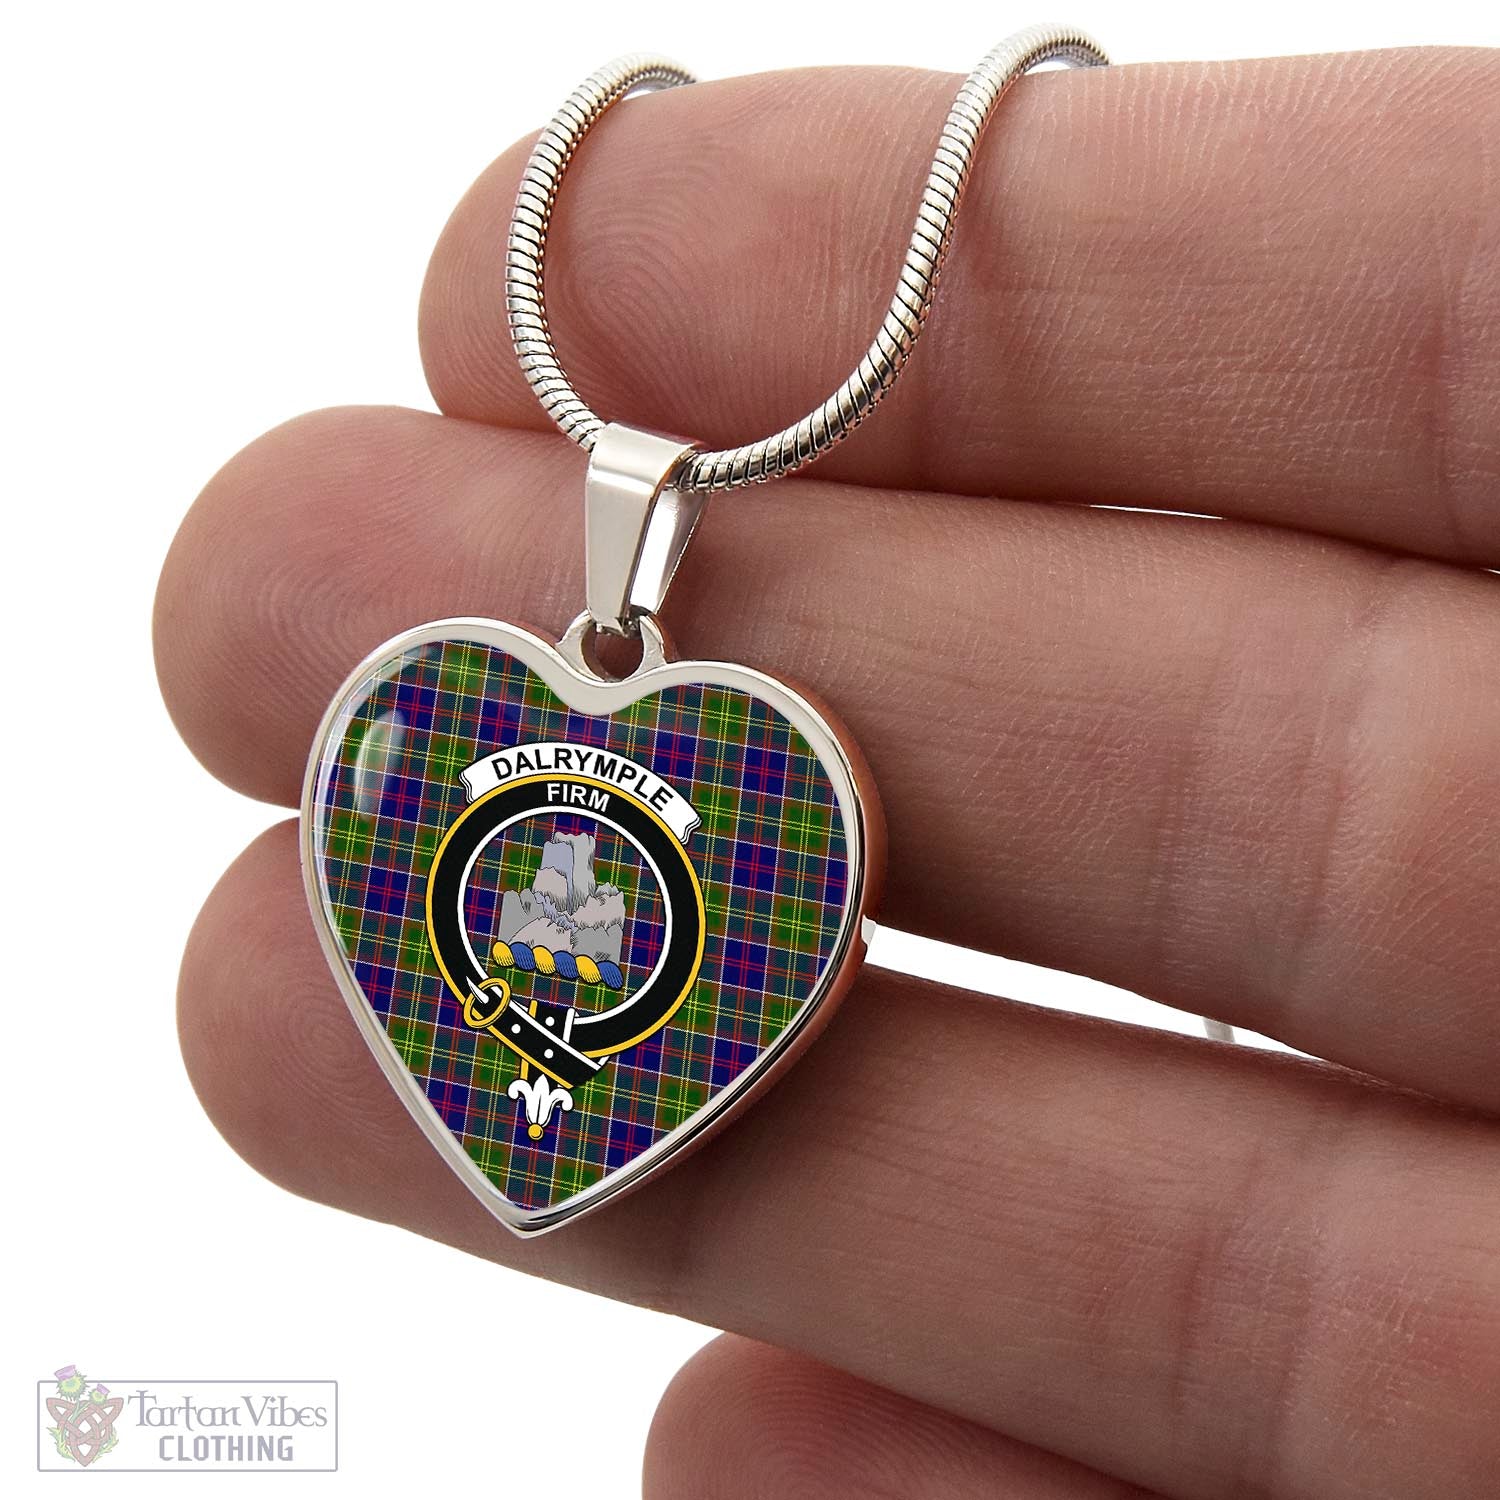 Tartan Vibes Clothing Dalrymple Tartan Heart Necklace with Family Crest